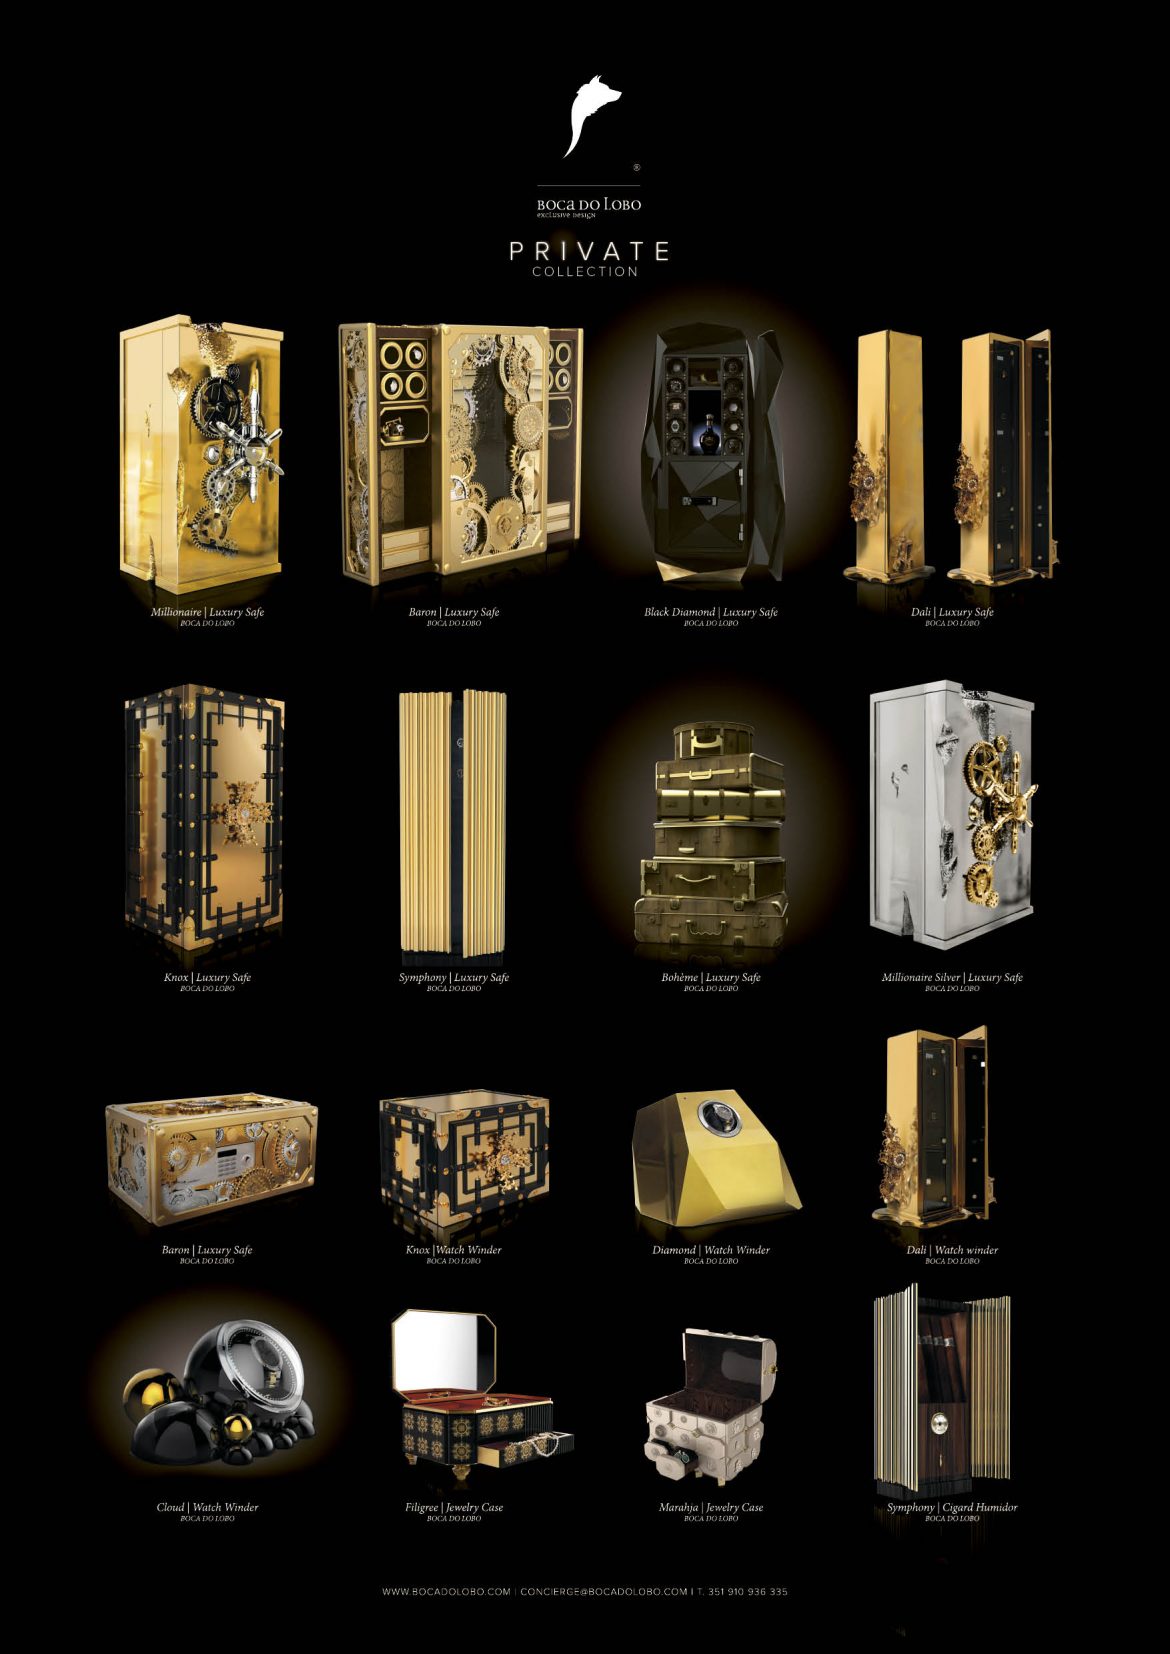 Luxury Safes by the Hand of Master Artisans - Boca do Lobo - Private Collection